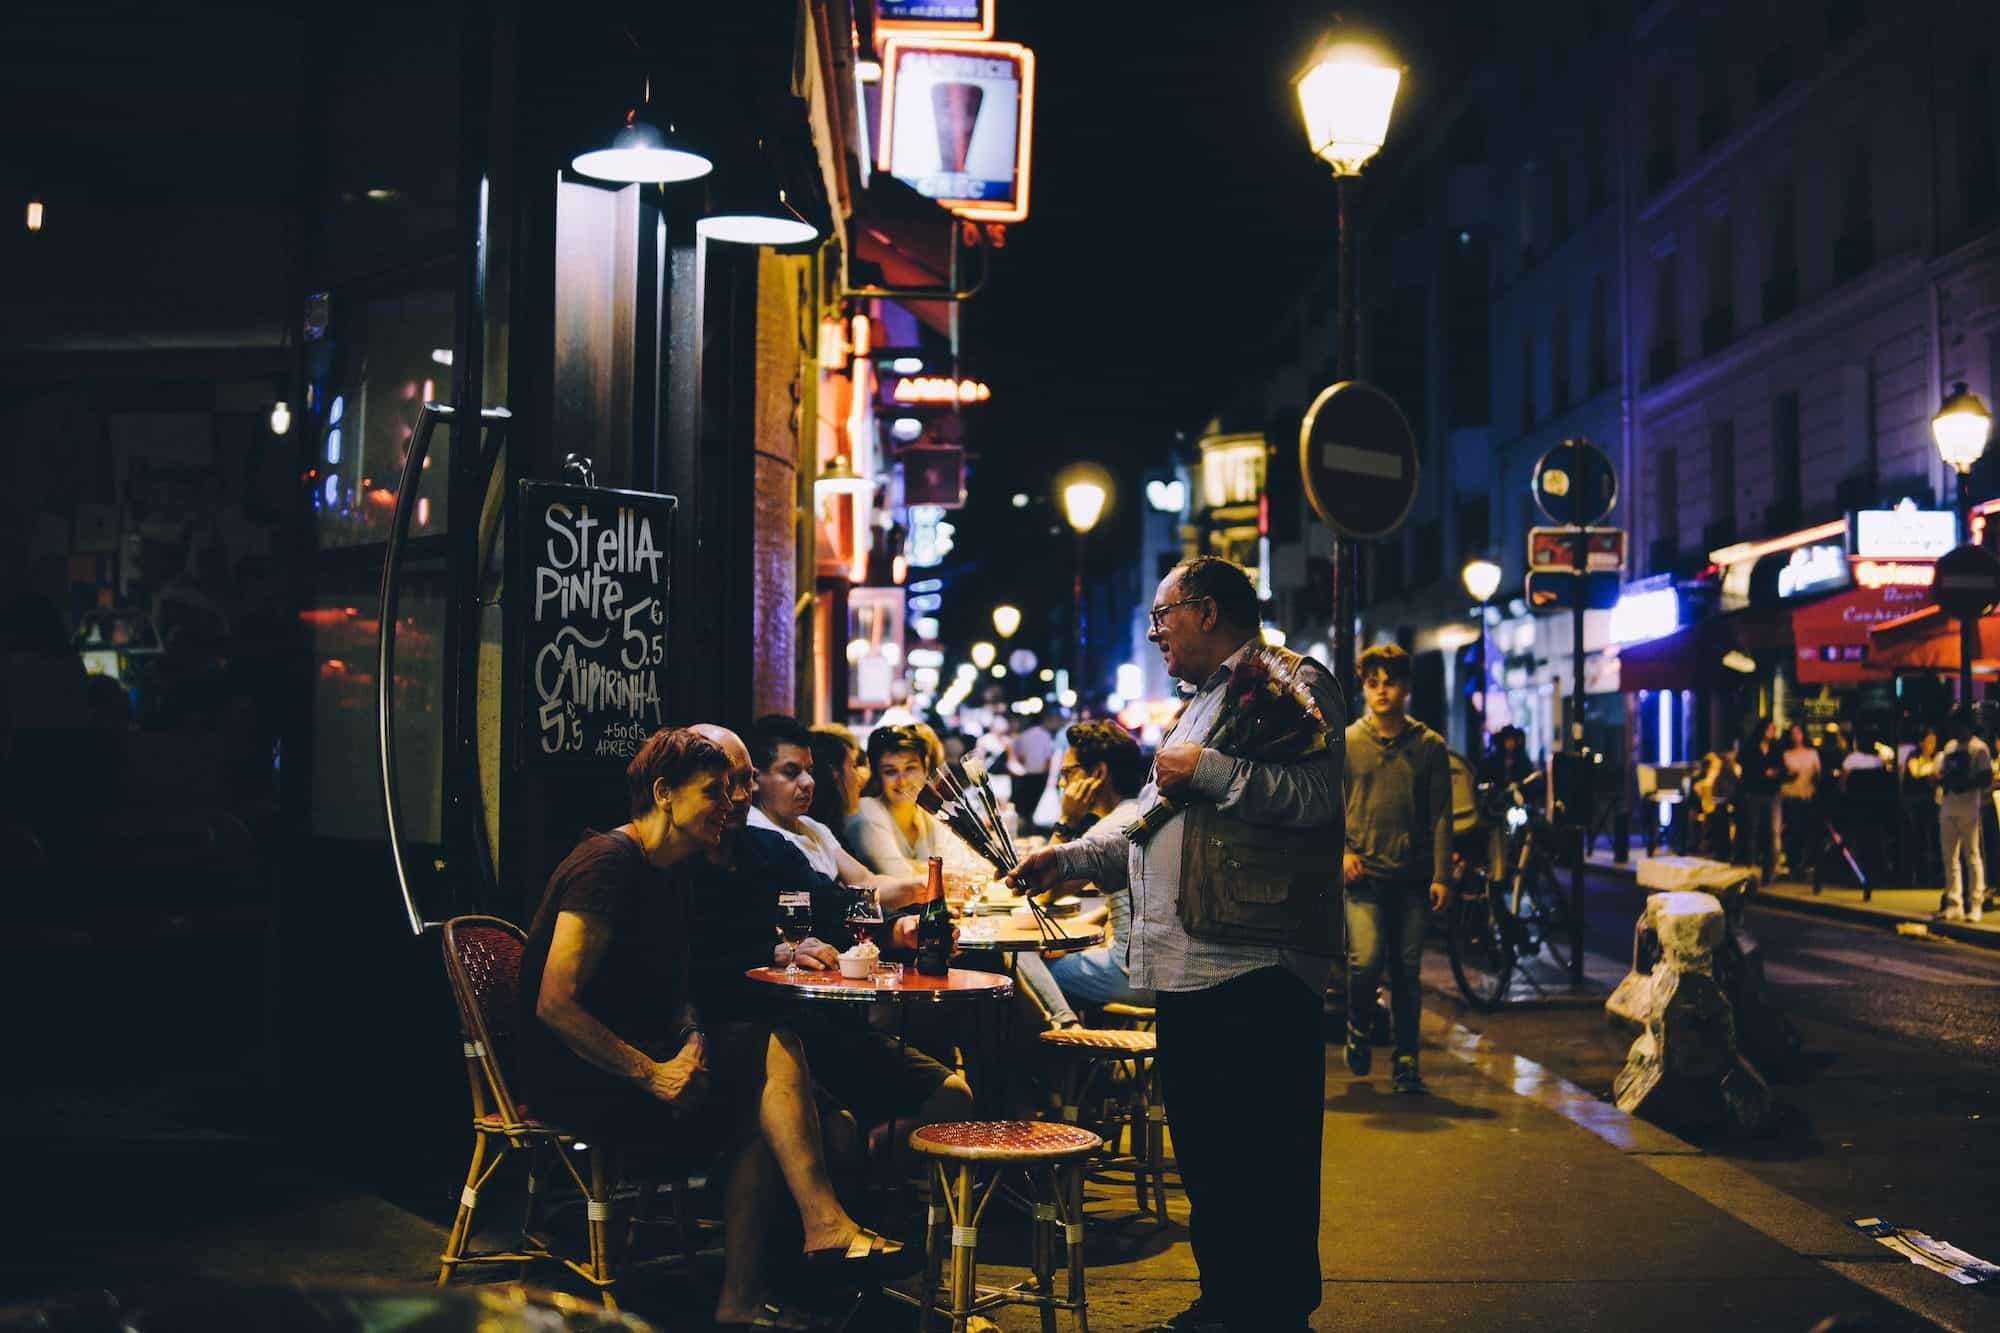 HiP Paris Blog writer gives you her tips to fast-track your French so you'll soon know how to kindly turn down the Paris street vendors' offers to buy a rose.